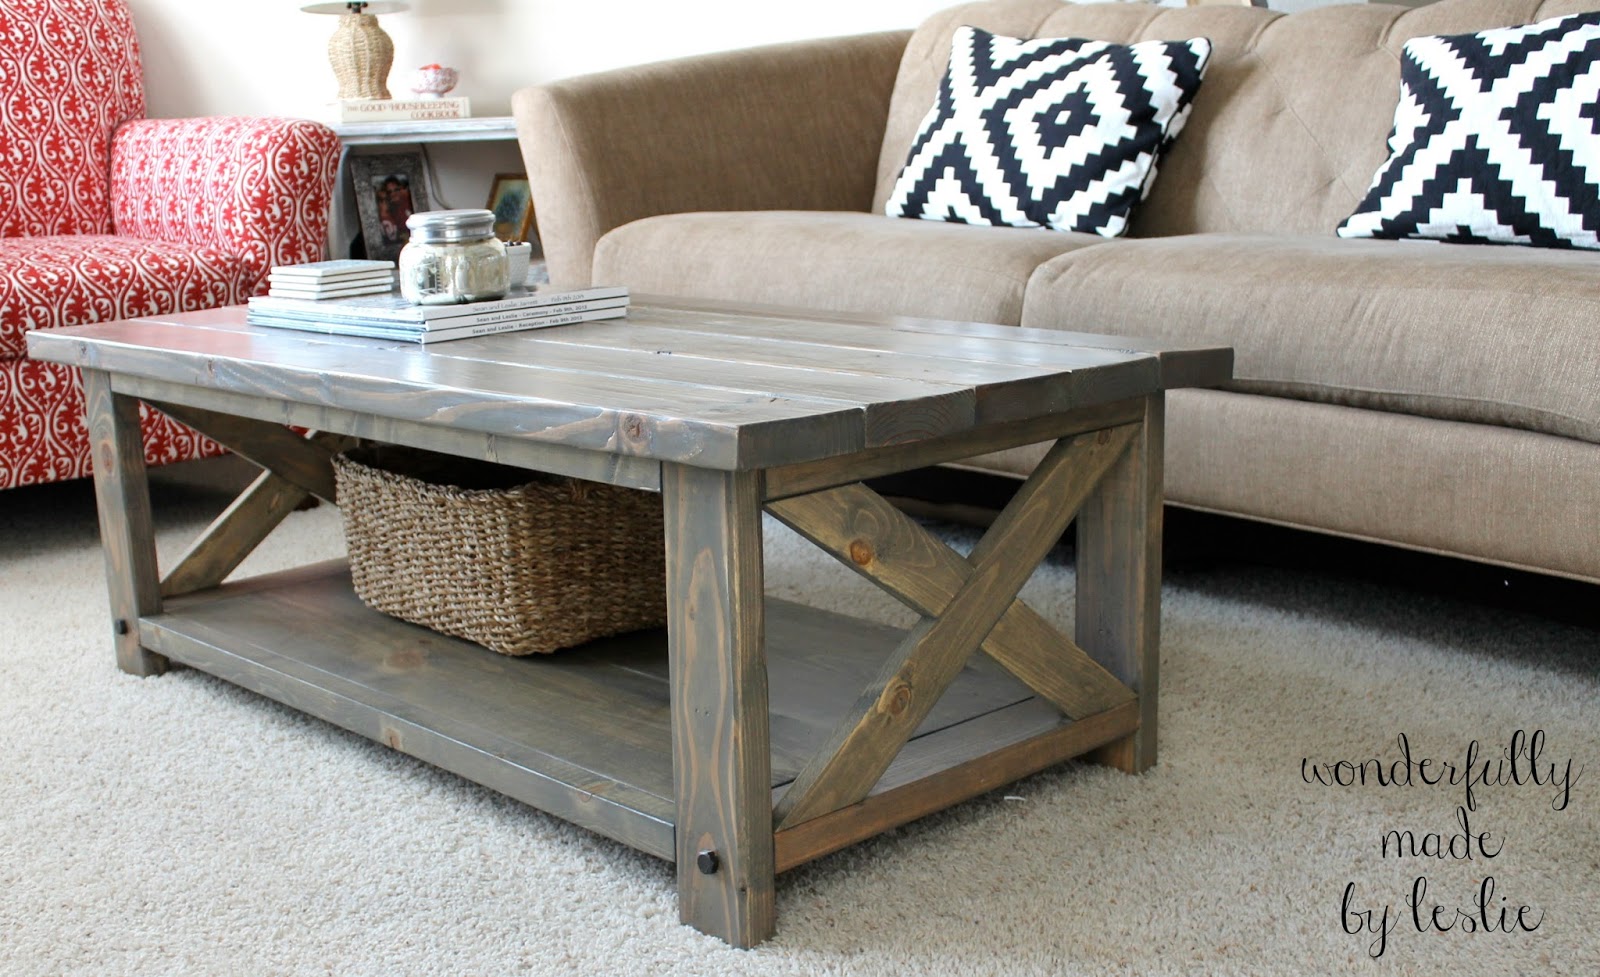 Wonderfully Made: Finished DIY Coffee Table